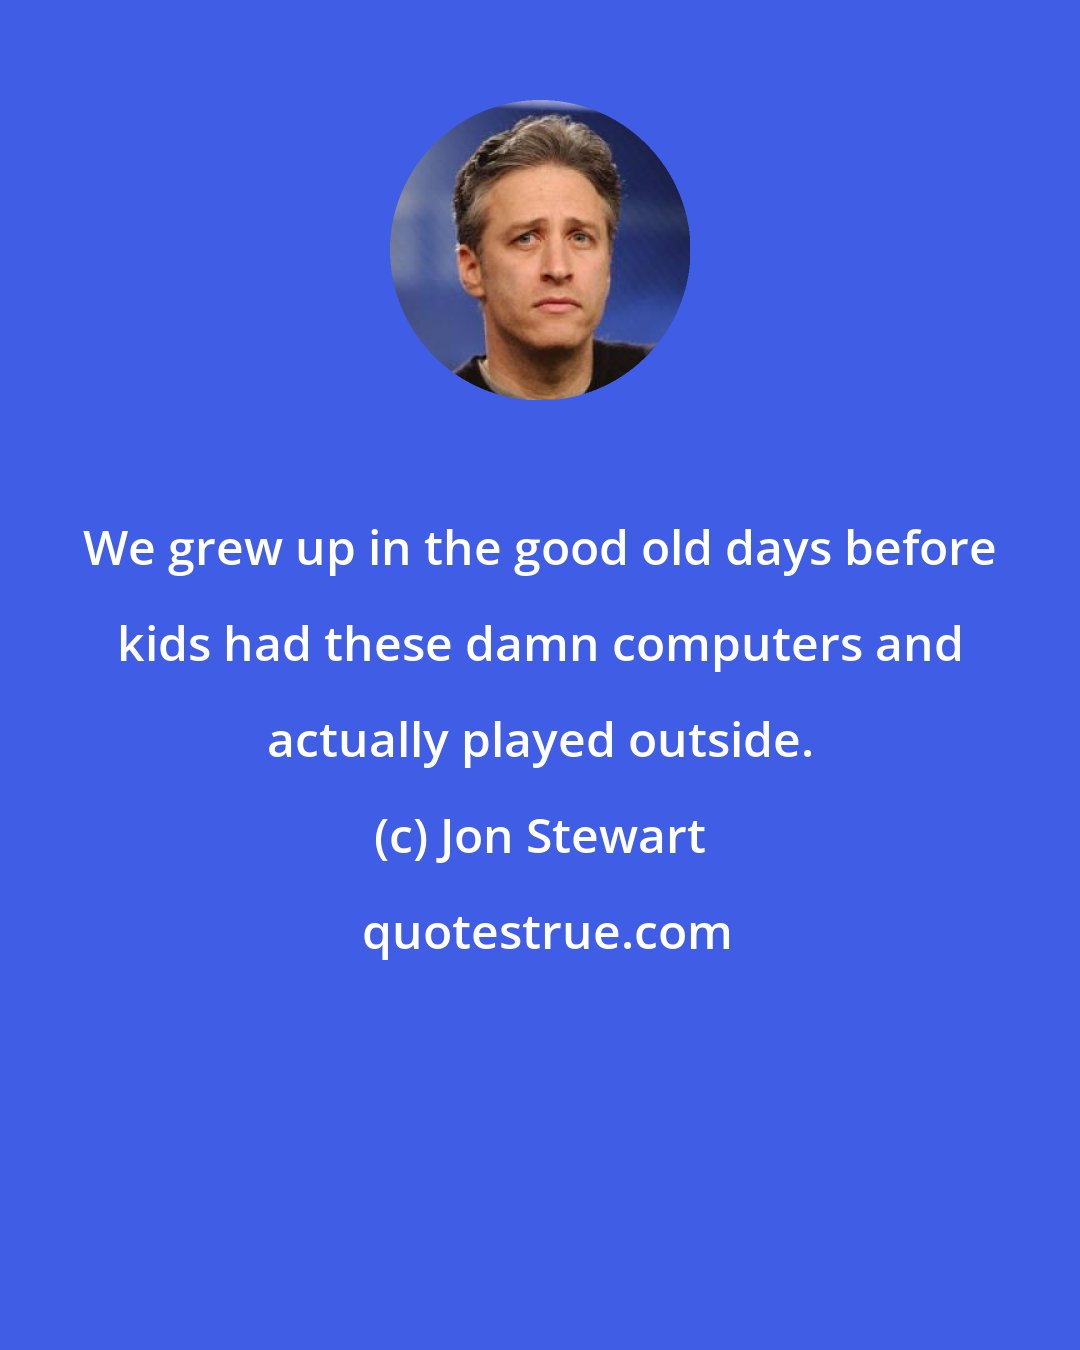 Jon Stewart: We grew up in the good old days before kids had these damn computers and actually played outside.